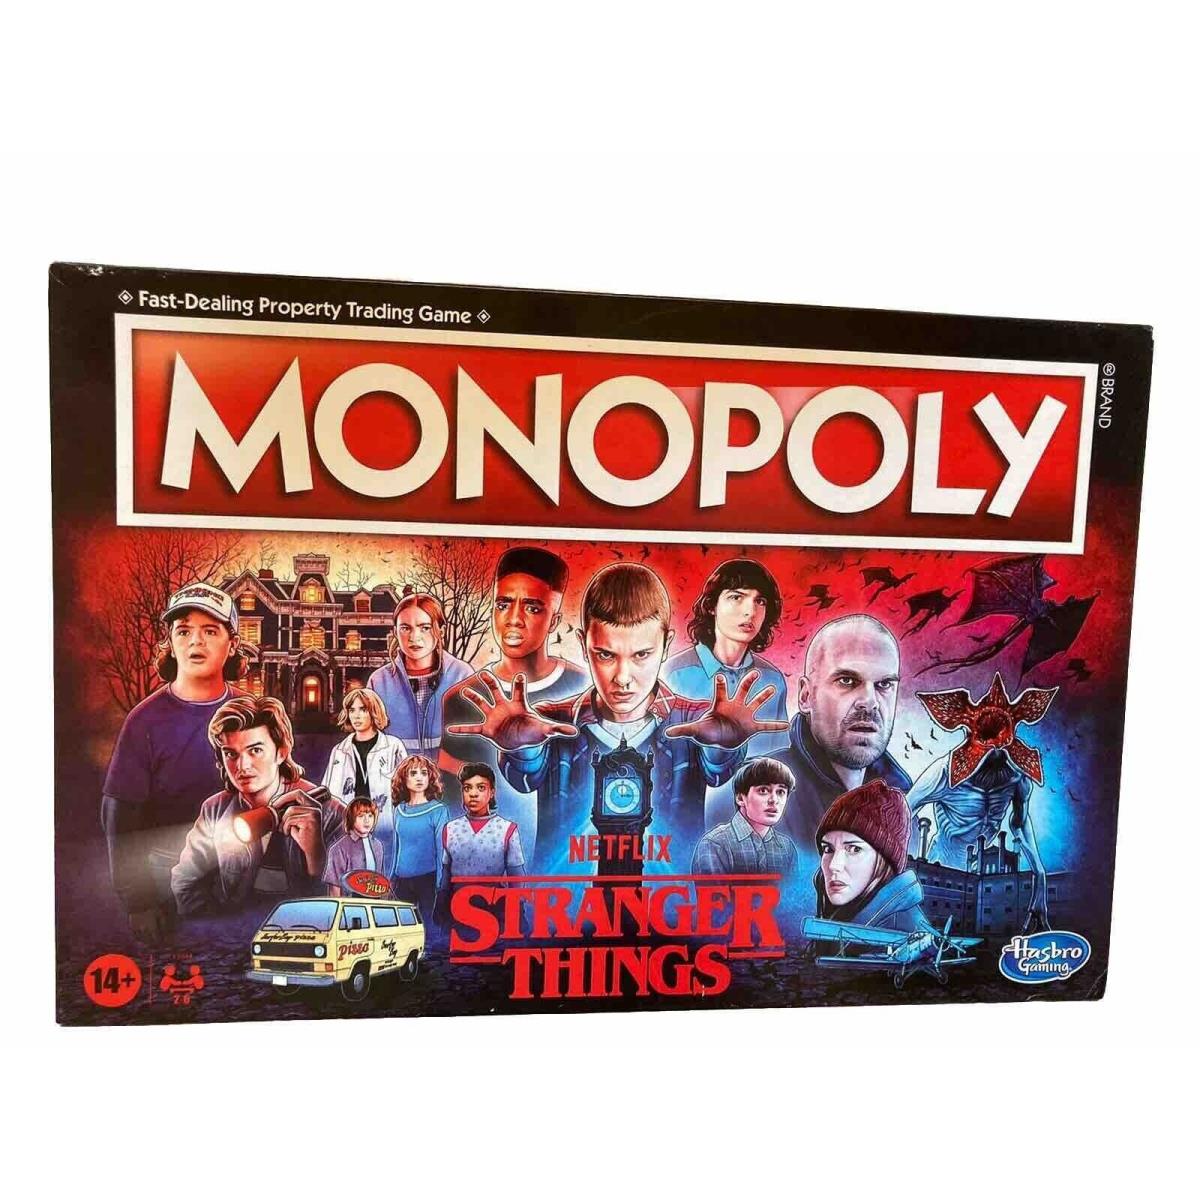 Monopoly Netflix Stranger Things Edition Board Game 14+